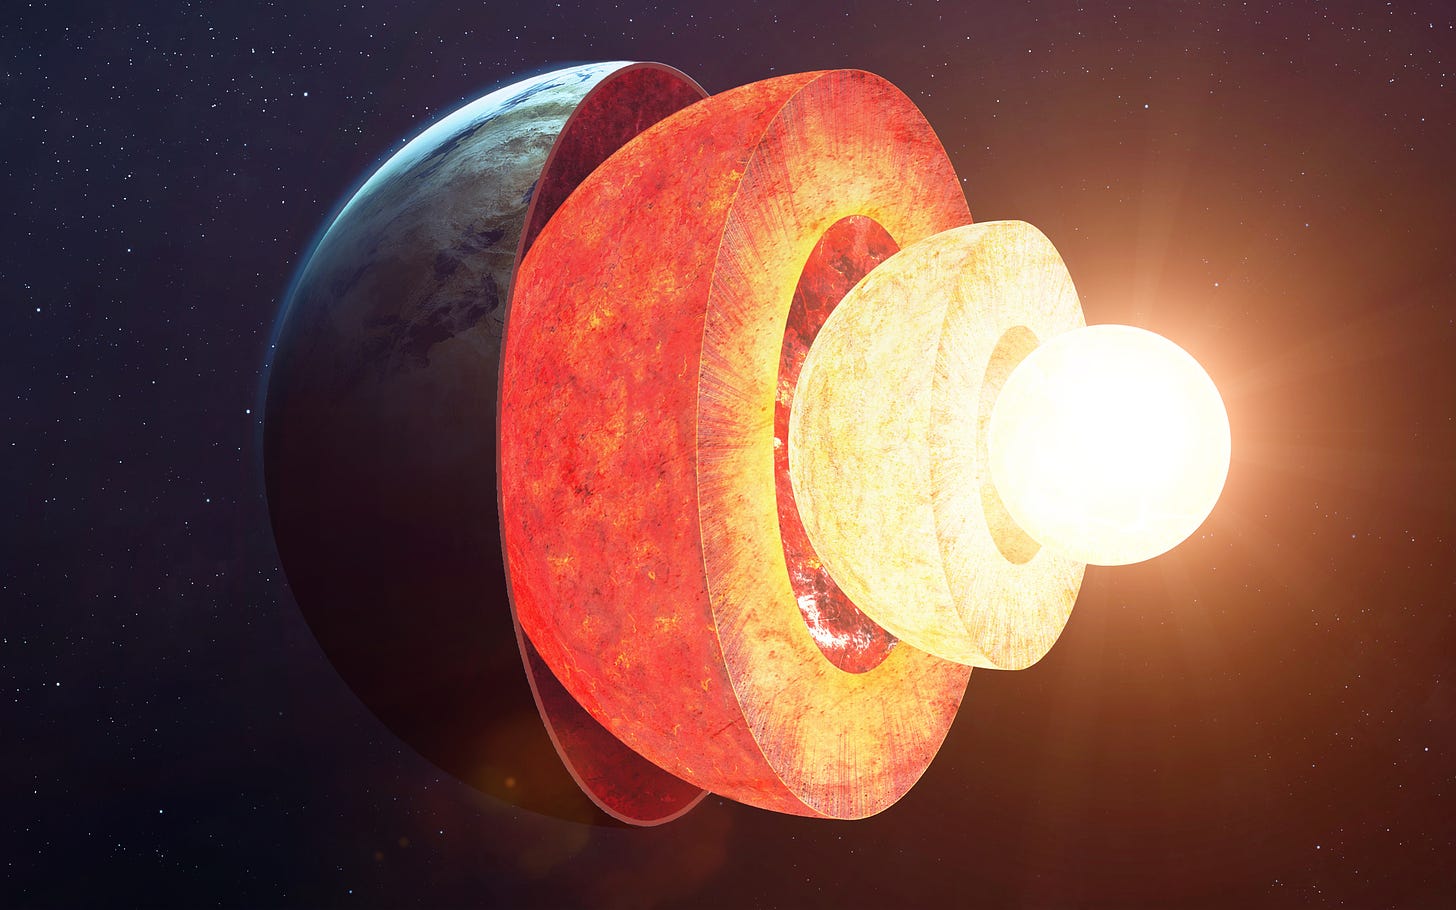 Earth's mysterious innermost core is a 400-mile-wide metallic ball | Space